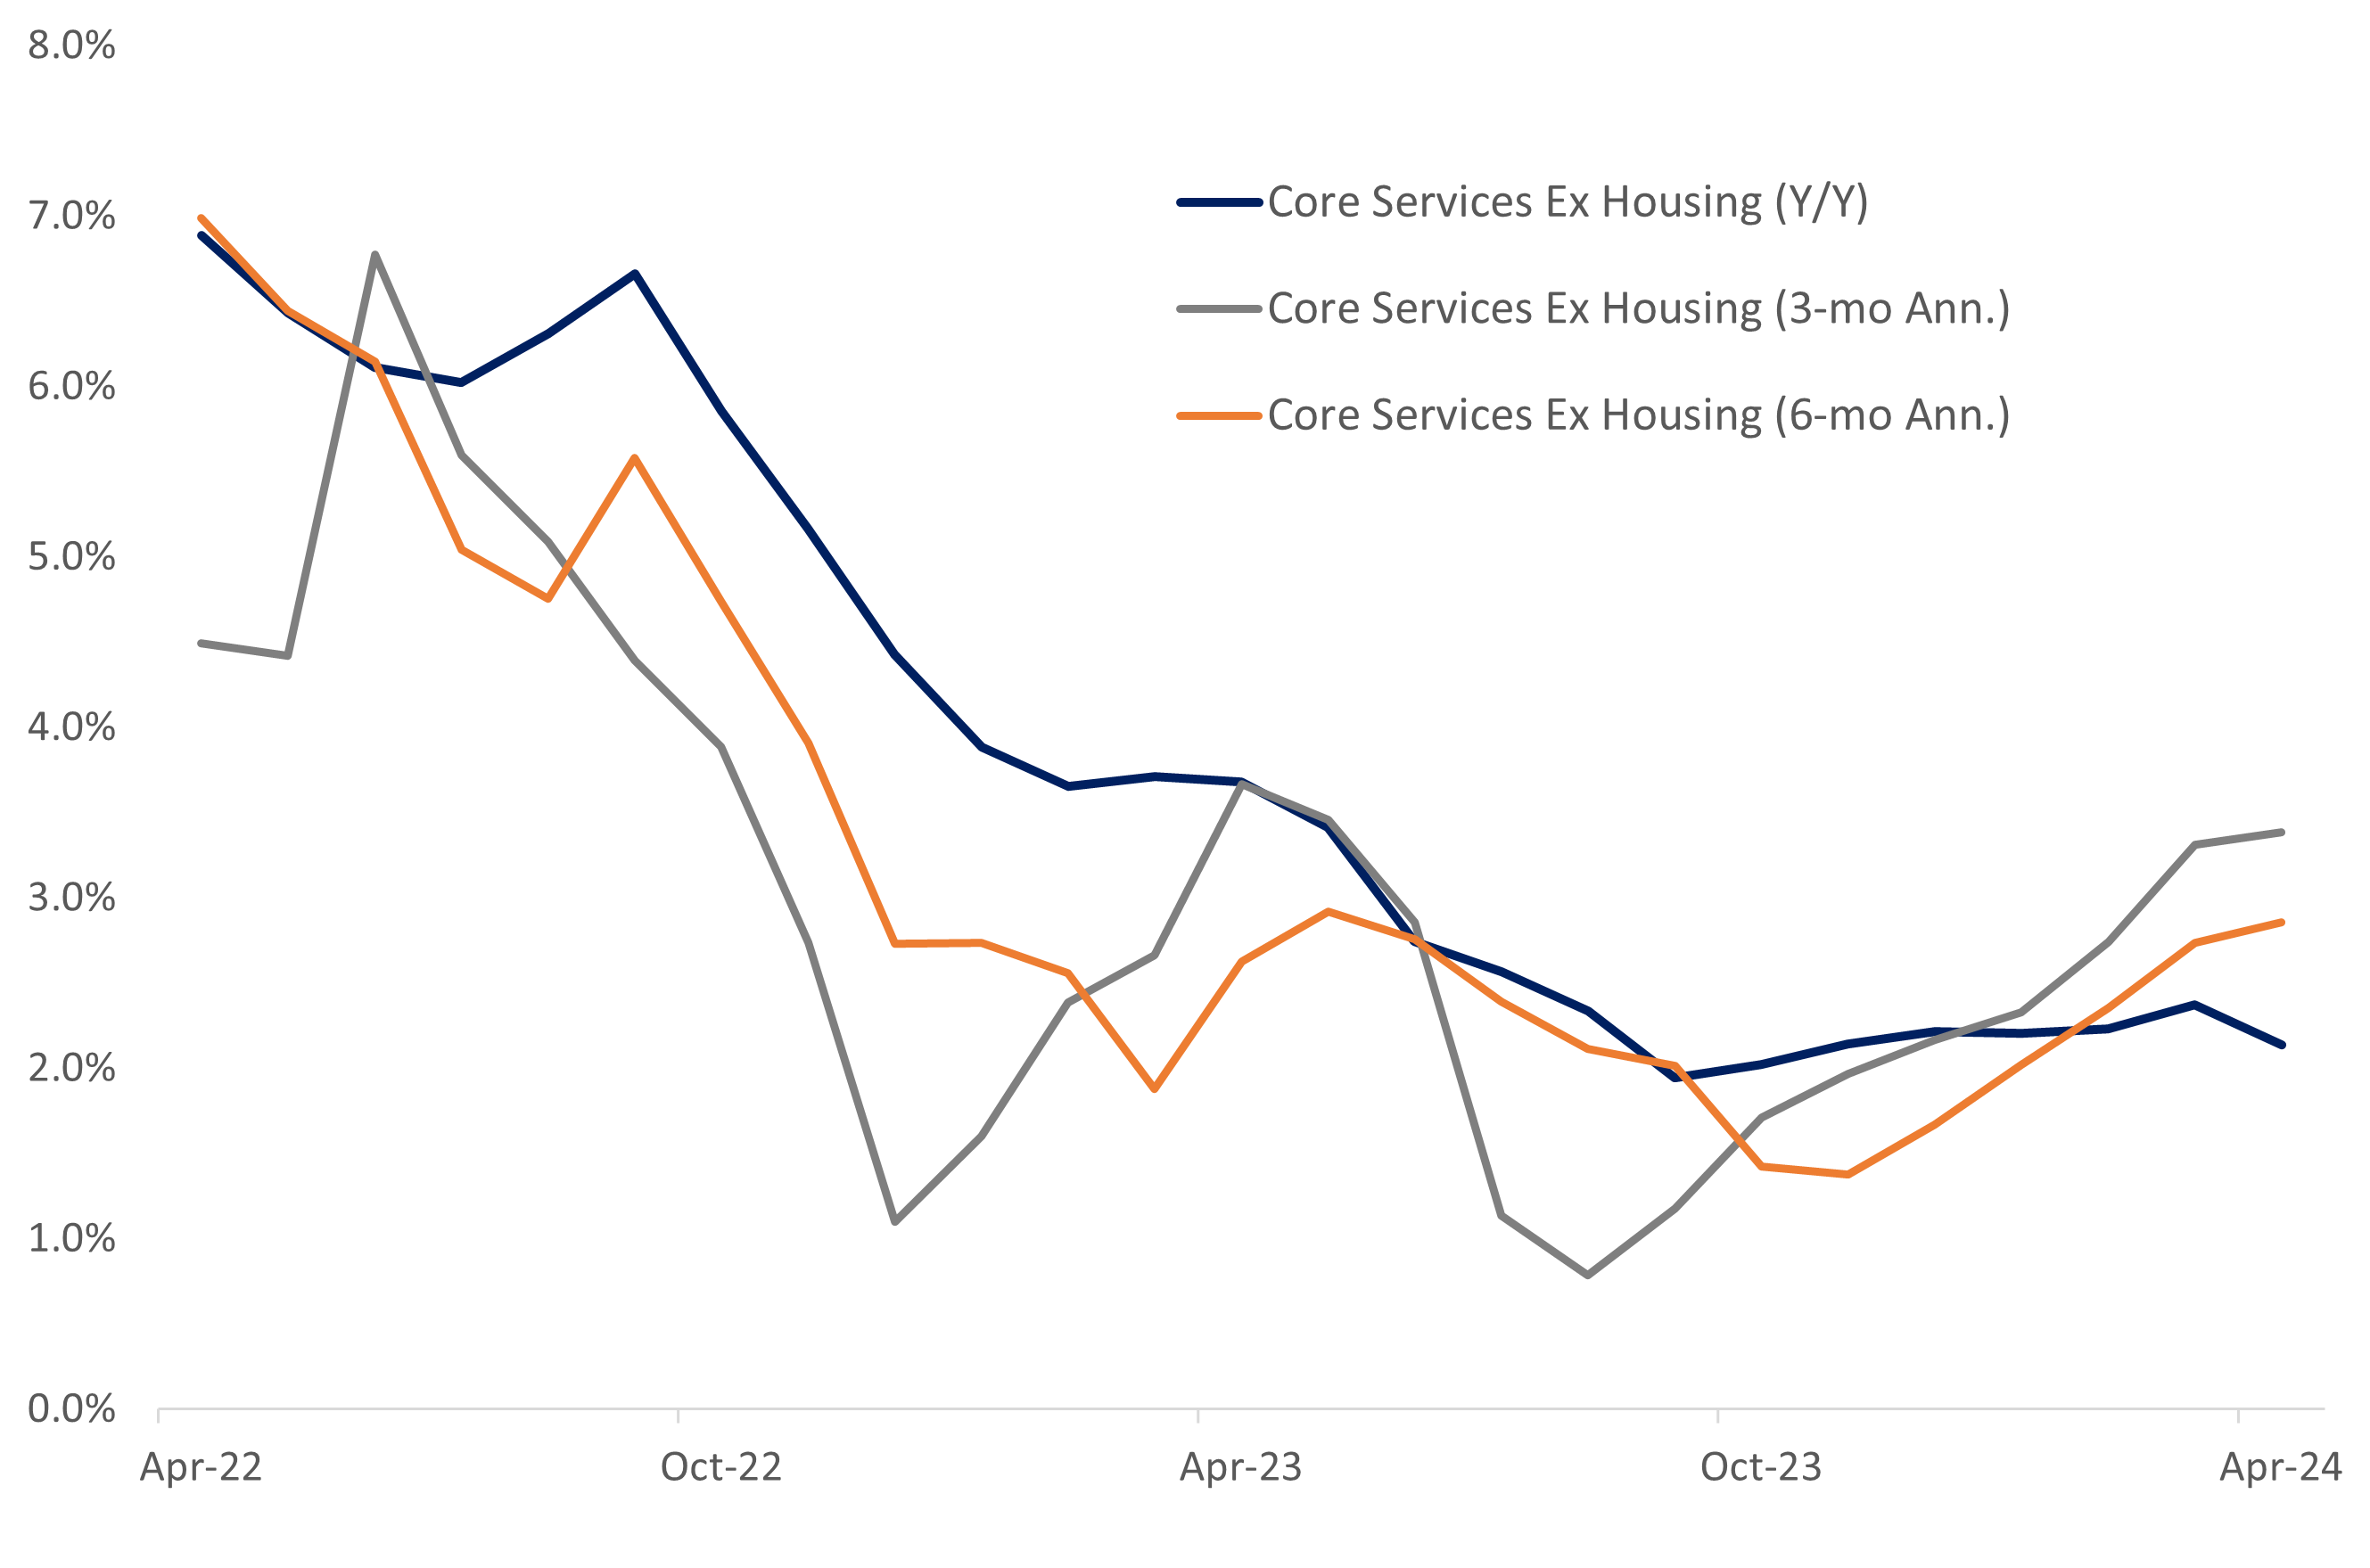 Line graph of core services inflation excluding housing from April 2022 to April 2024 as described in the subsequent paragraph.